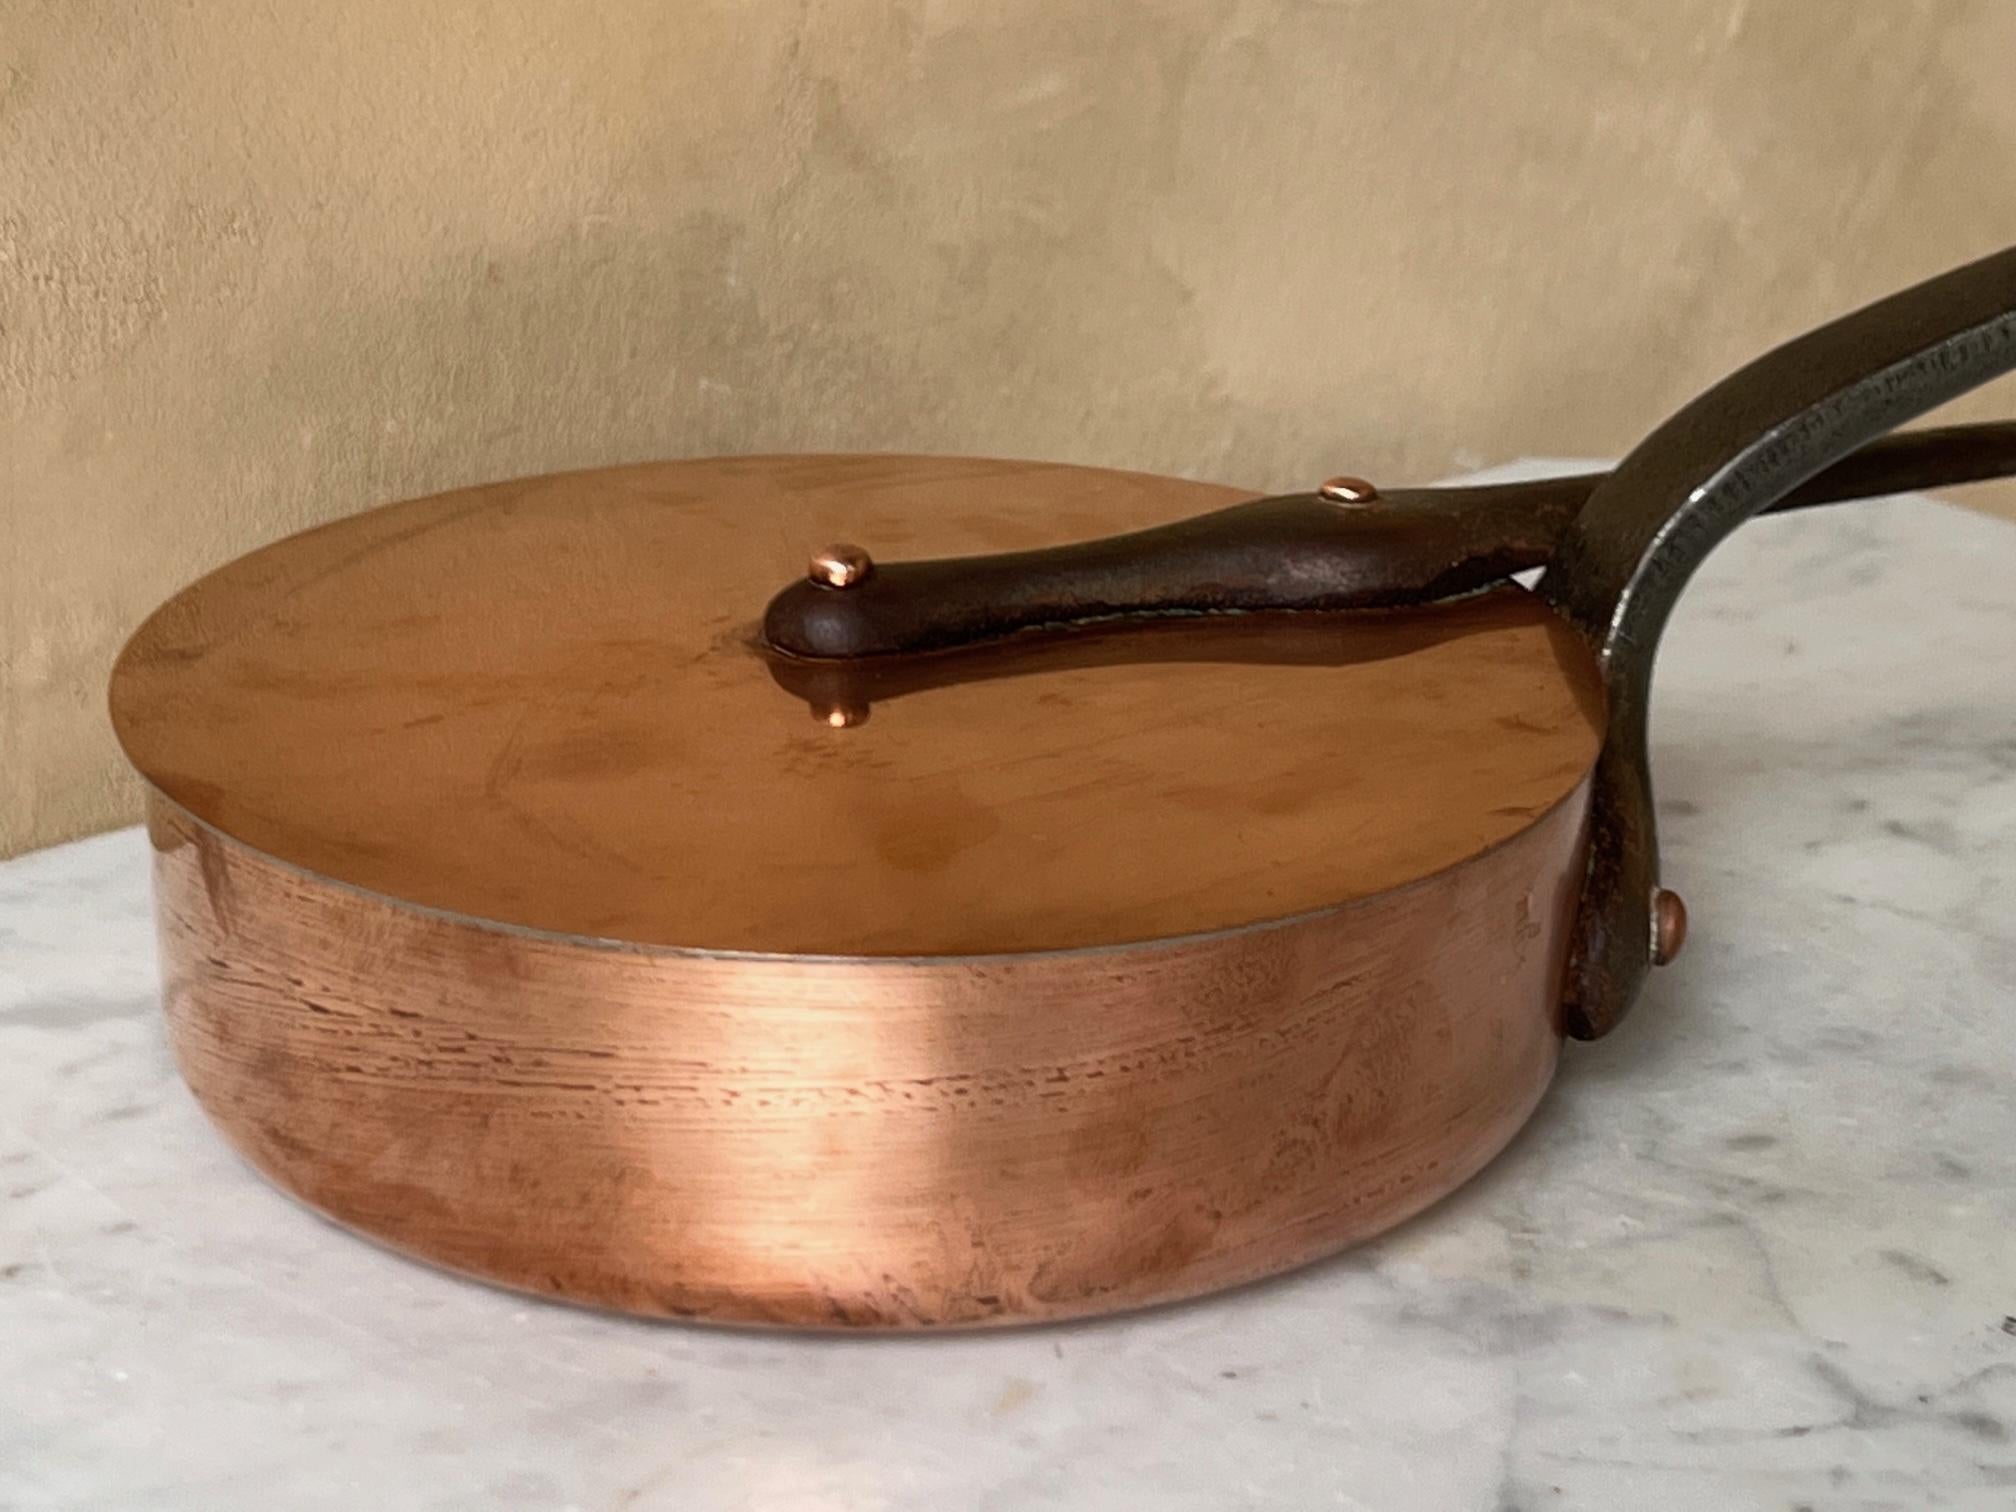 Vintage French copper saute pan and lid. The copper pot and handle have long cast iron handles with copper rivets and loops at the top for hanging each. Each piece has a layer of tin and ready to use.

The pan is stamped Cusinier

Pan measures 8